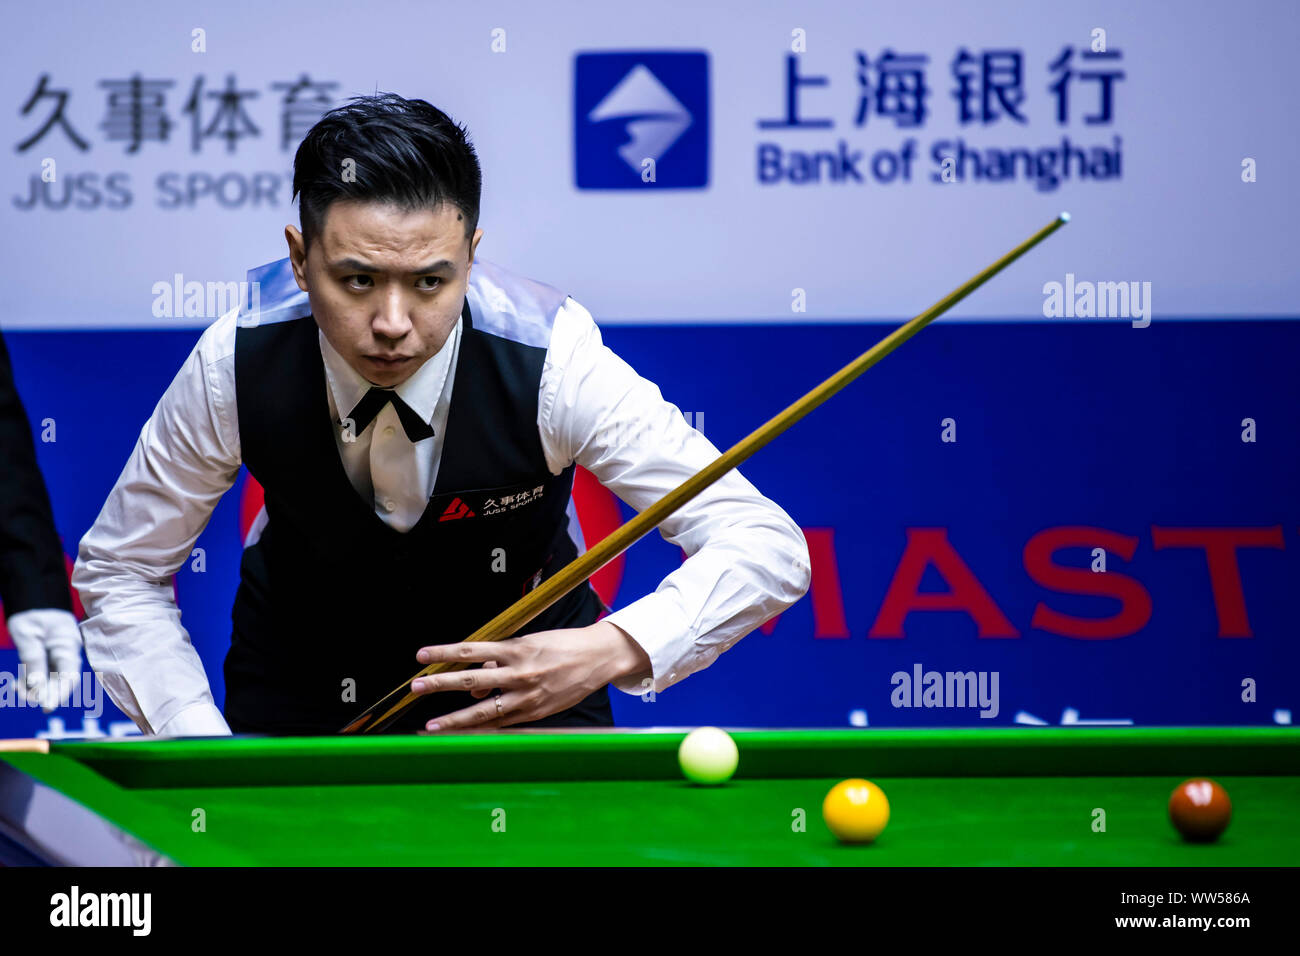 Picture of Chinese professional snooker player Xiao Guodong at the Frist Round of 2019 Snooker Shanghai Masters in Shanghai, China, 9 September 2019